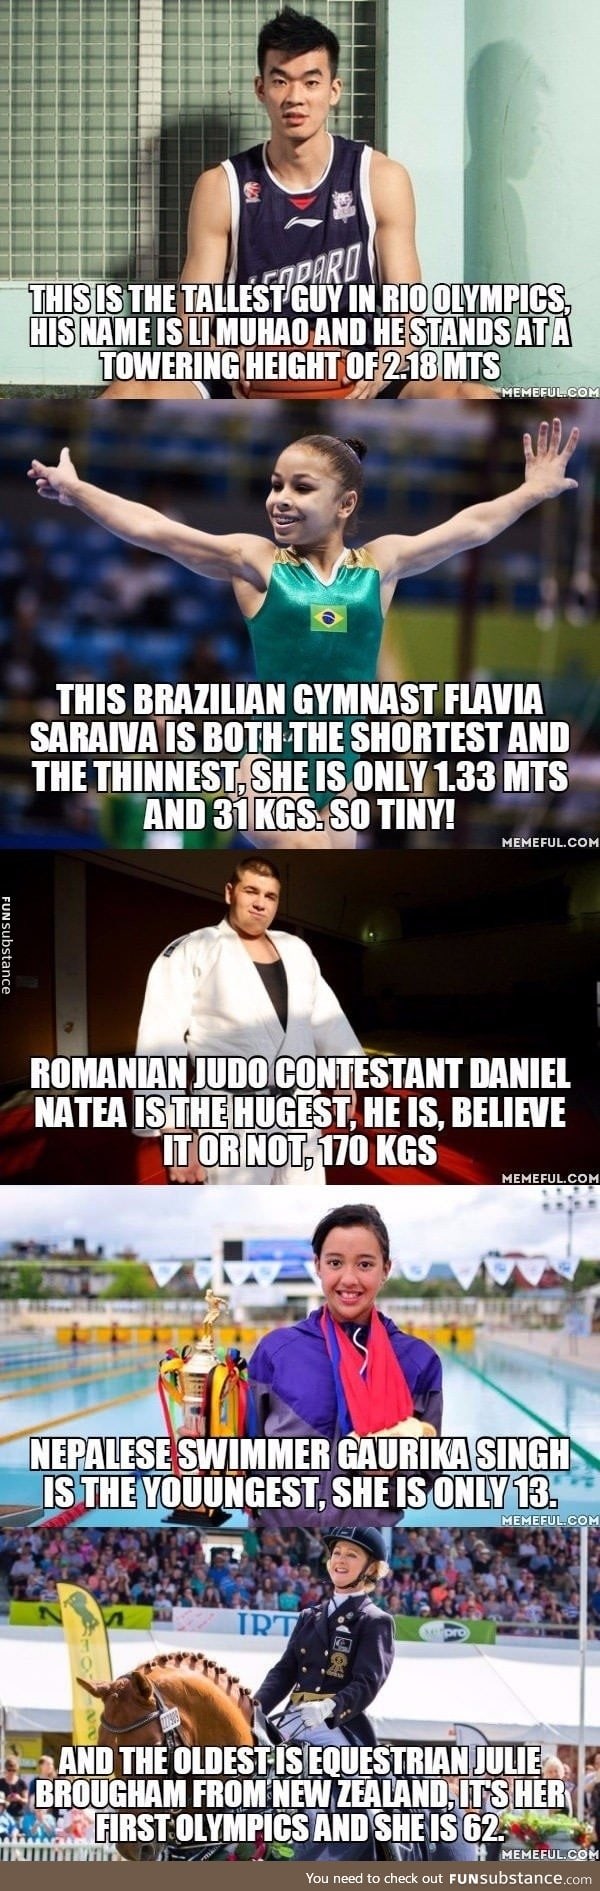 Here are some Rio Olympics facts